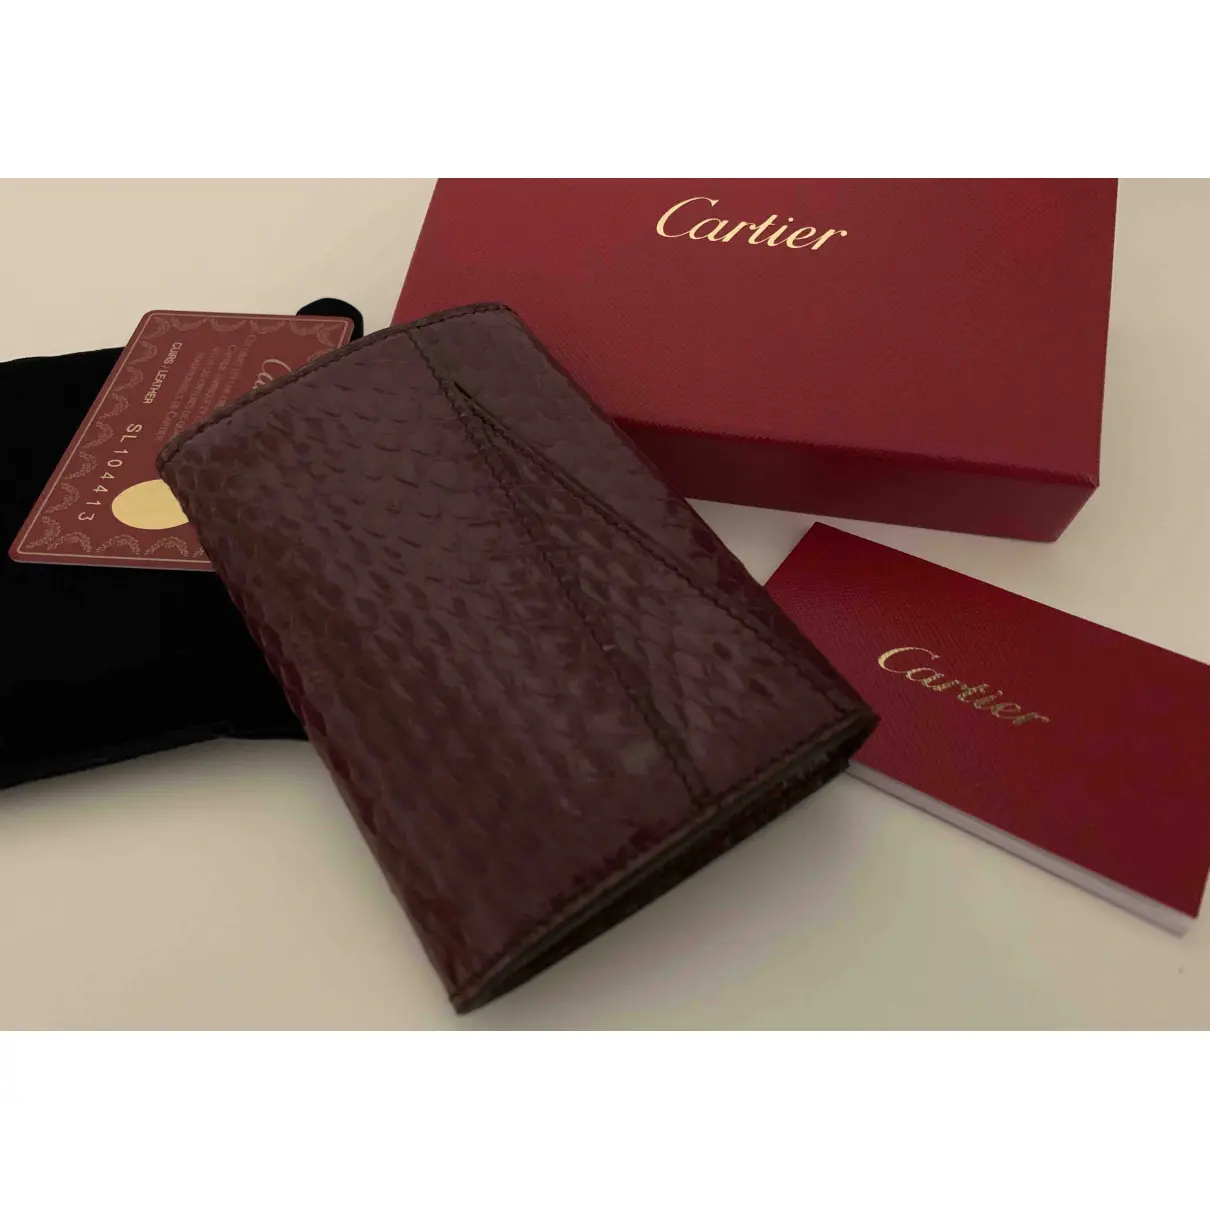 Buy Cartier Exotic leathers purse online